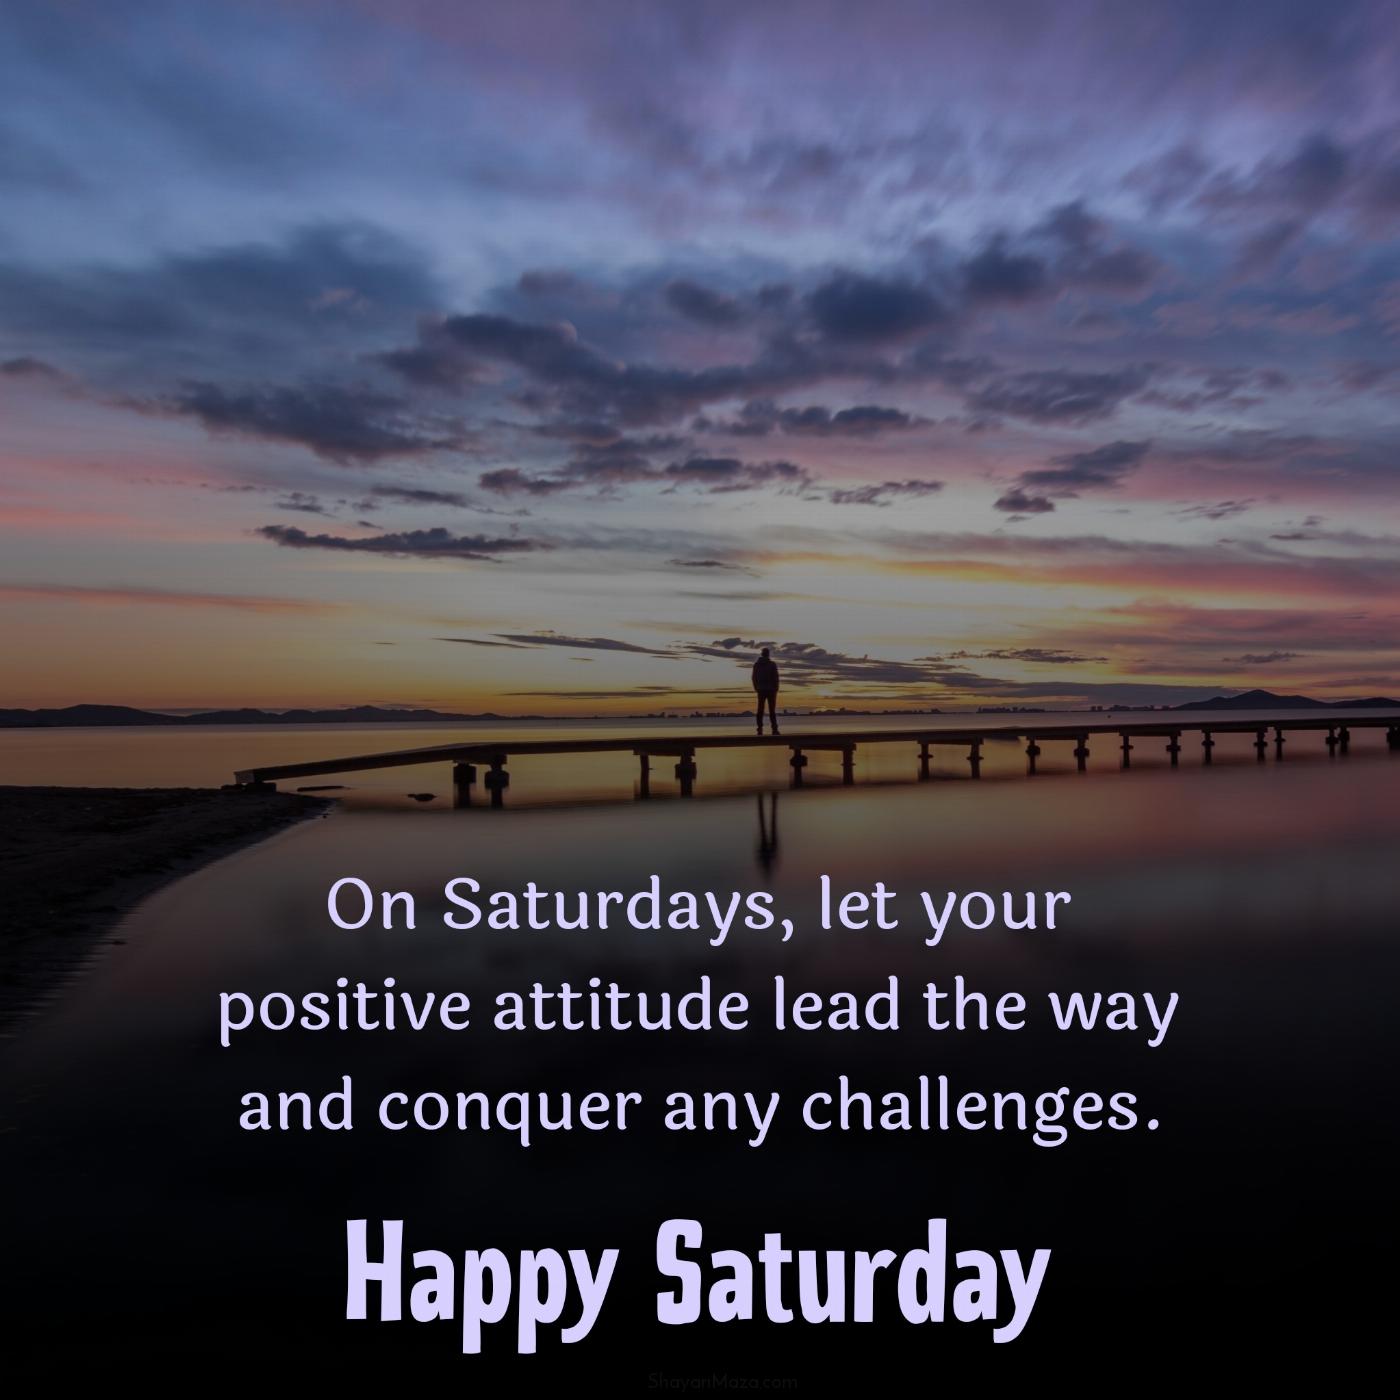 On Saturdays let your positive attitude lead the way